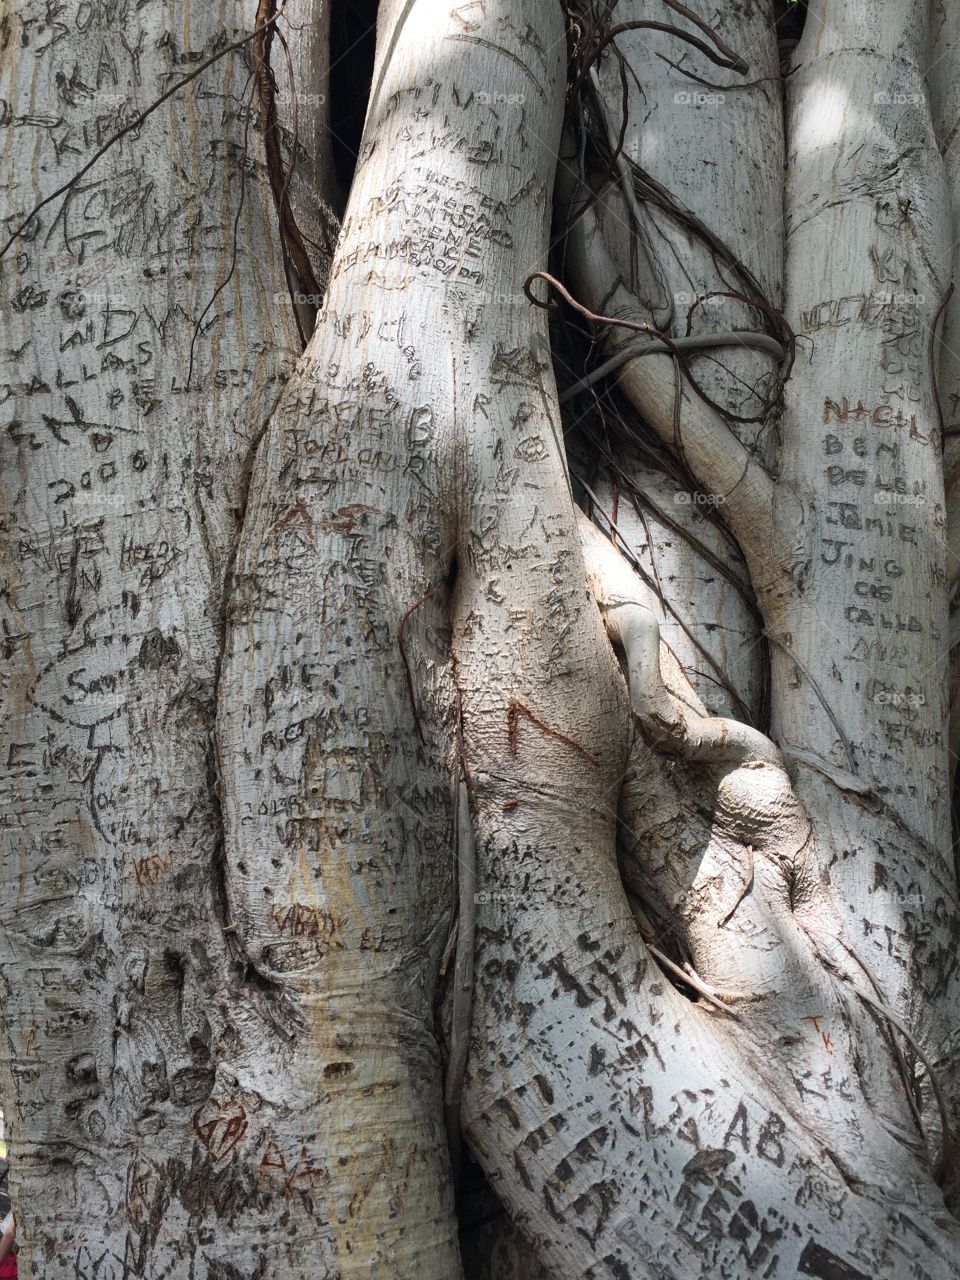 Carvings on the large banyan tree in Lahaina 